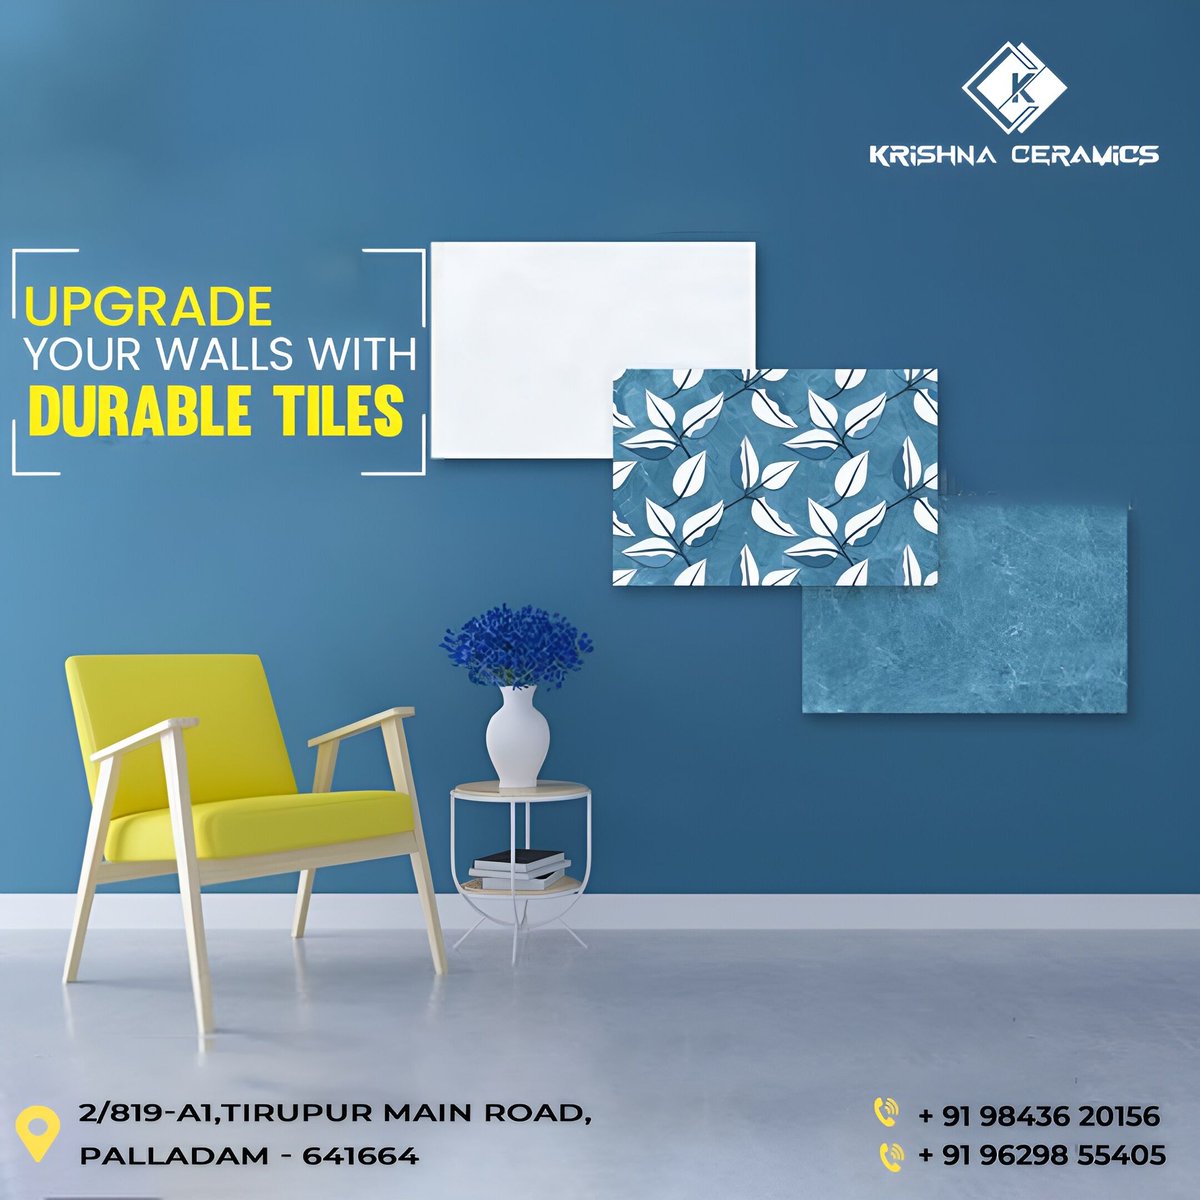 Don't give up style for durability when you may have the best of both worlds with our tiles.
#tiledesign #tiles #durabletiles #floortilesdesign #tilestyle